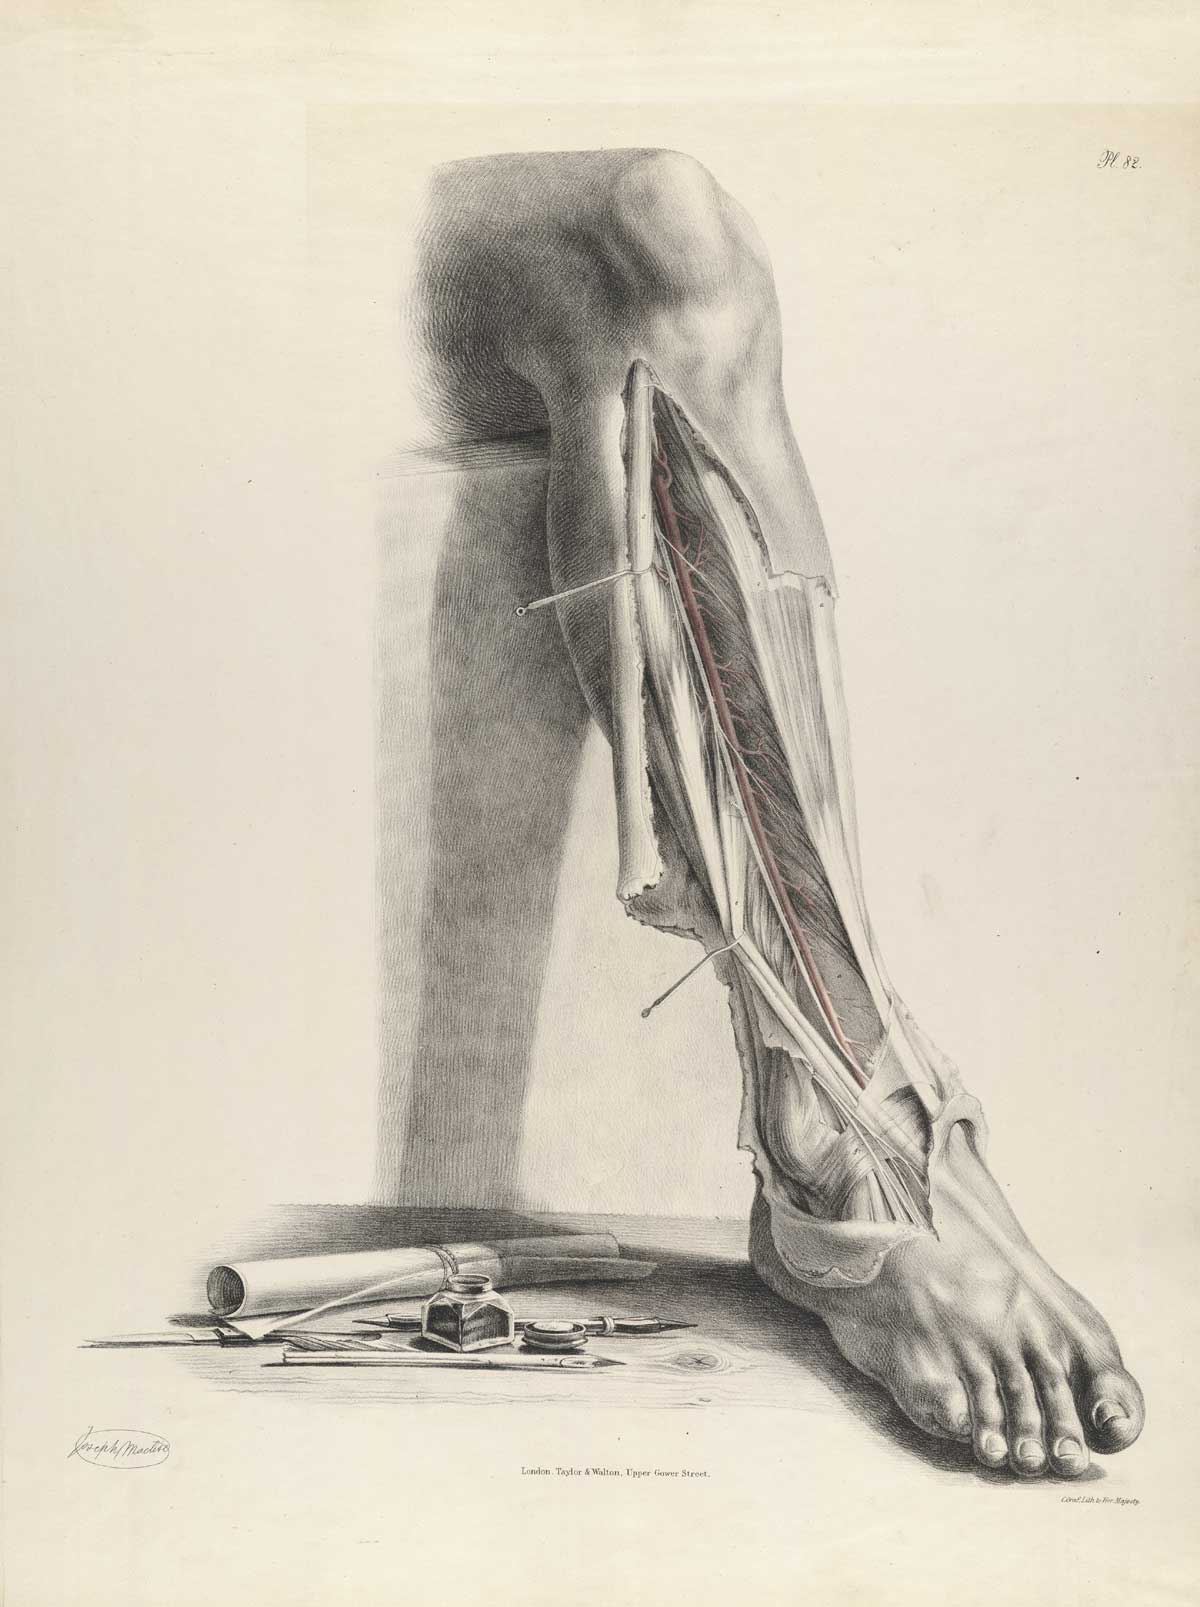 Plate 82 of Quain's The anatomy of the arteries of the human body, with its applications to pathology and operative surgery, featuring the front view of the arteries that run from the knee to the top of the foot of the right leg. Beside the foot is a scroll with a pen and an inkwell.